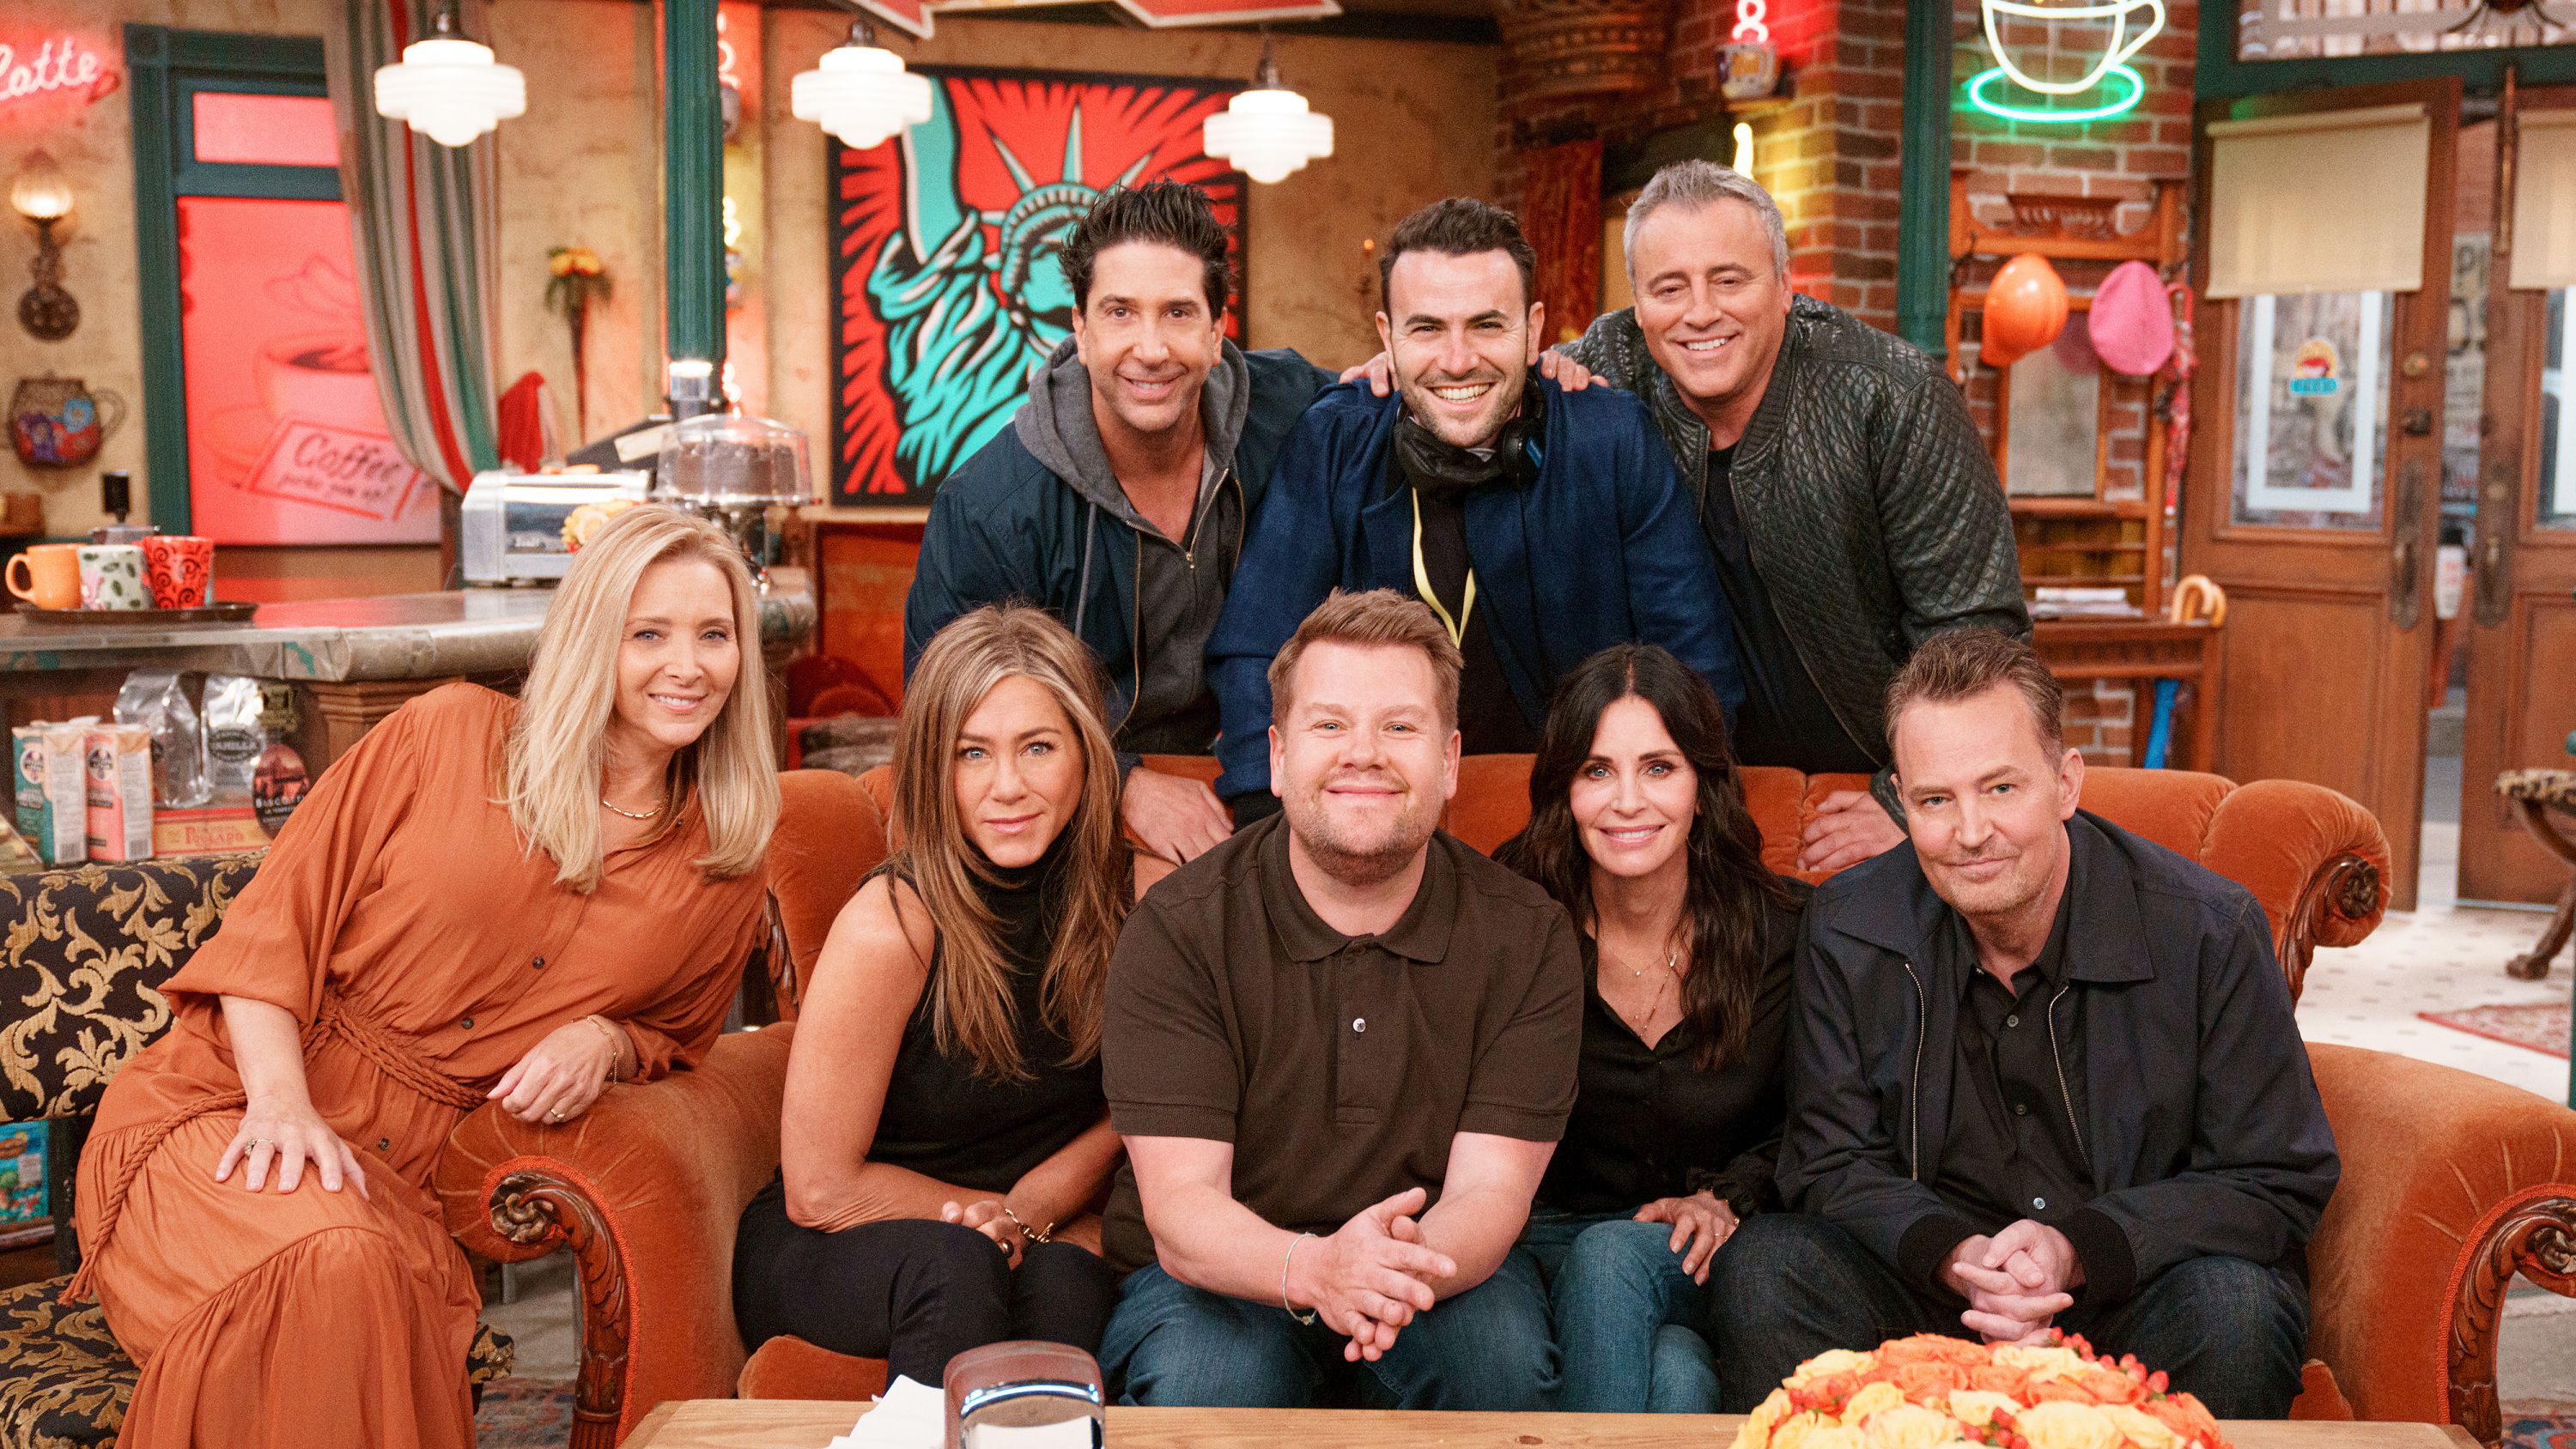 Friends Reunion TV Special — All 6 Members of the ​Friends Cast​ Are Coming  Back to TV